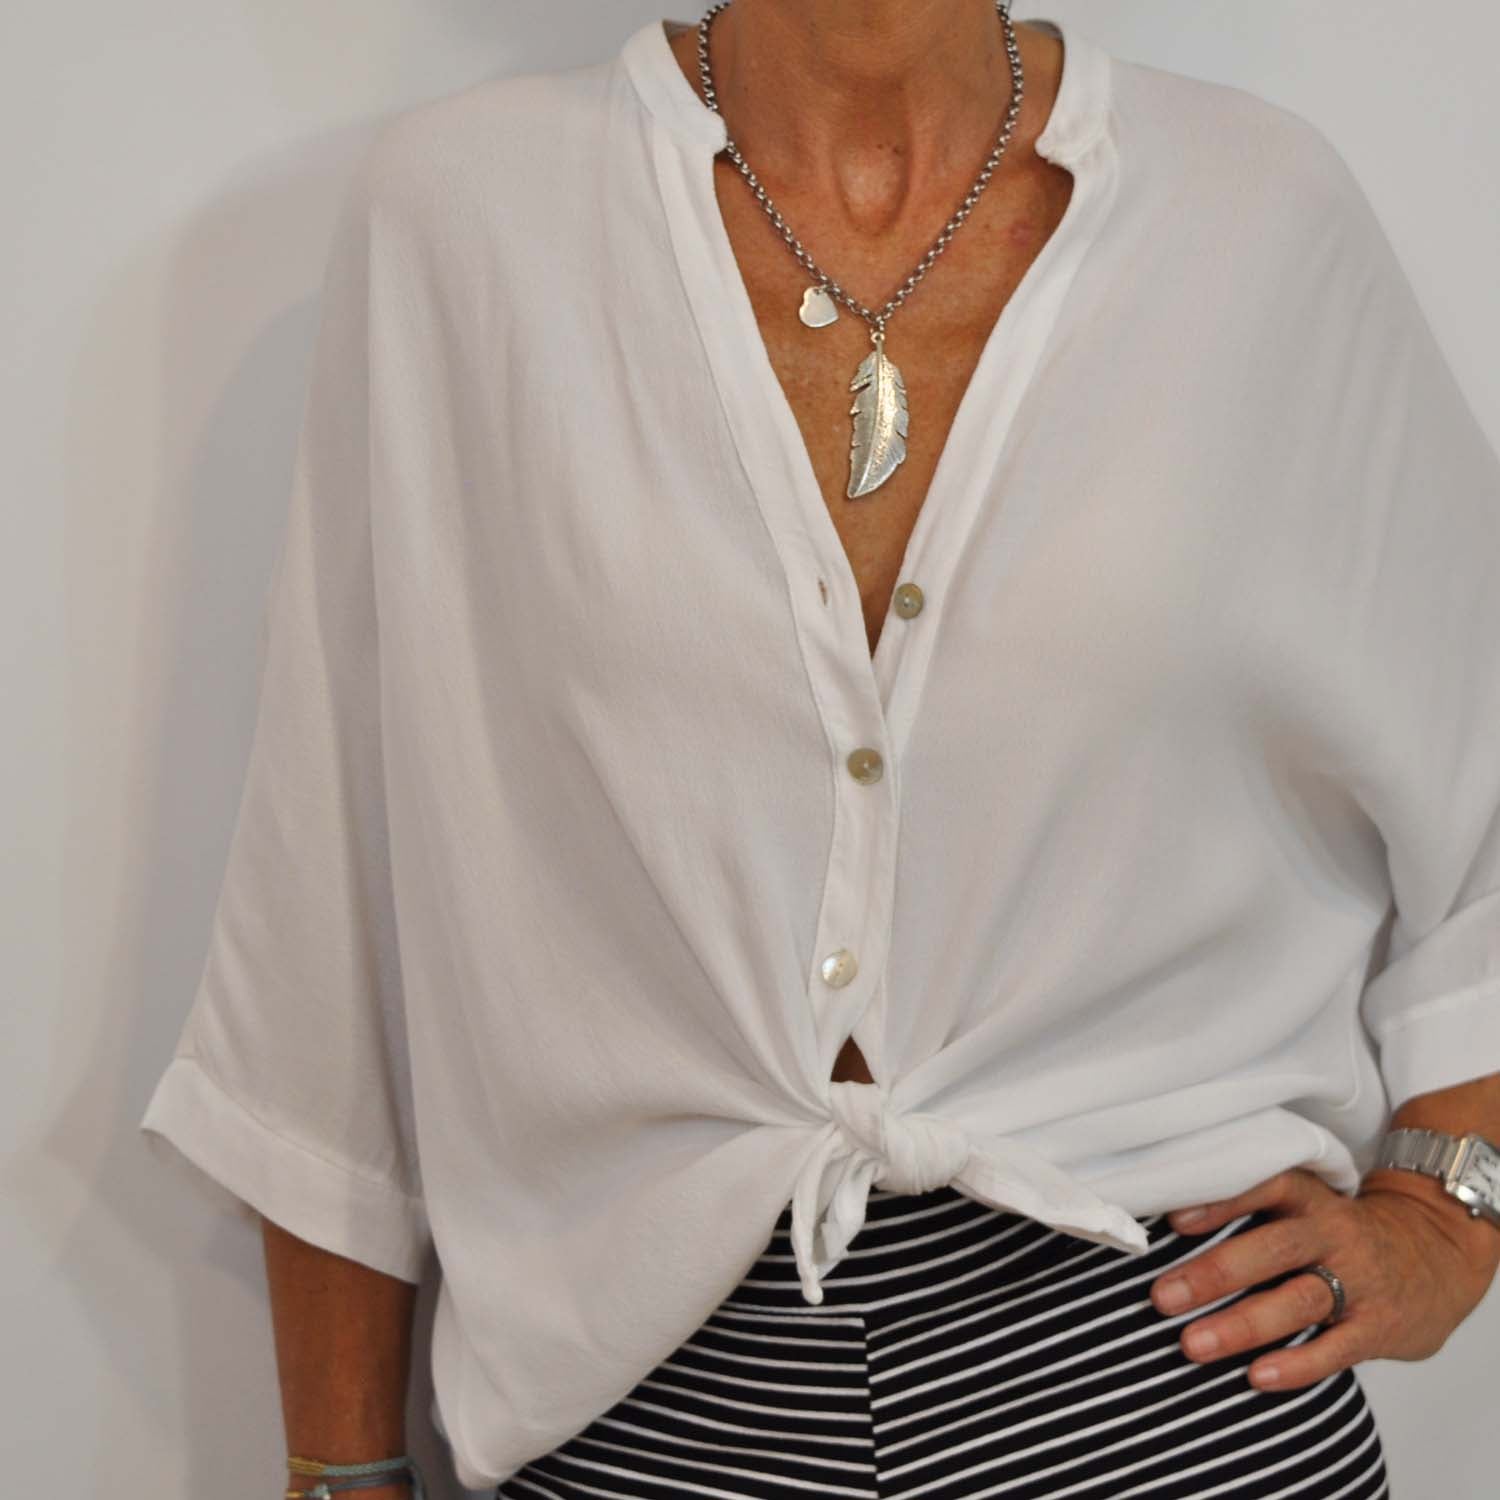 Chemise oversize blanche